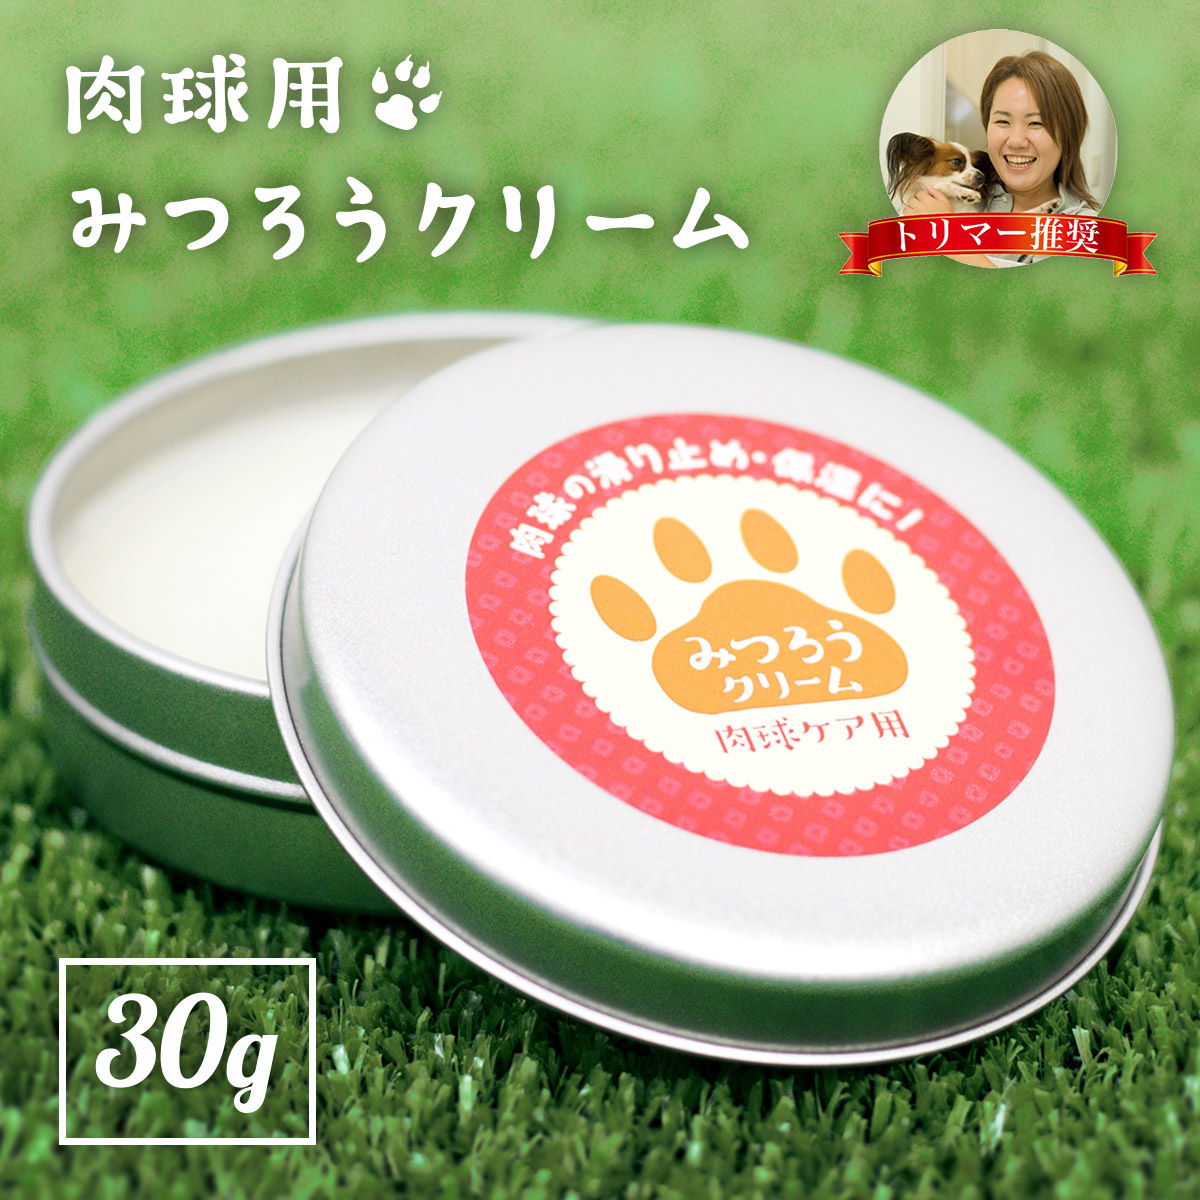  domestic production natural .... pad cream 30g dog cat for for pets no addition * fragrance free molasses .mitsu low pad care slip prevention dry crack cream 